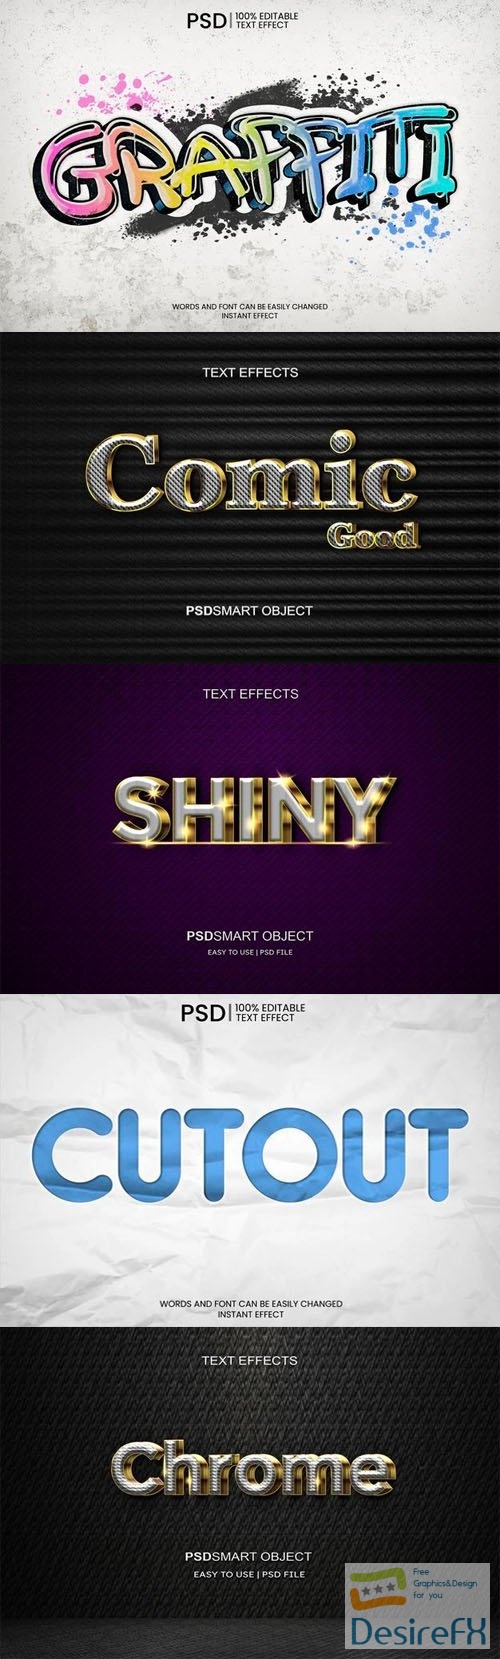 Realistic &amp; Creative Text Effects Collection - 10+ PSD Templates